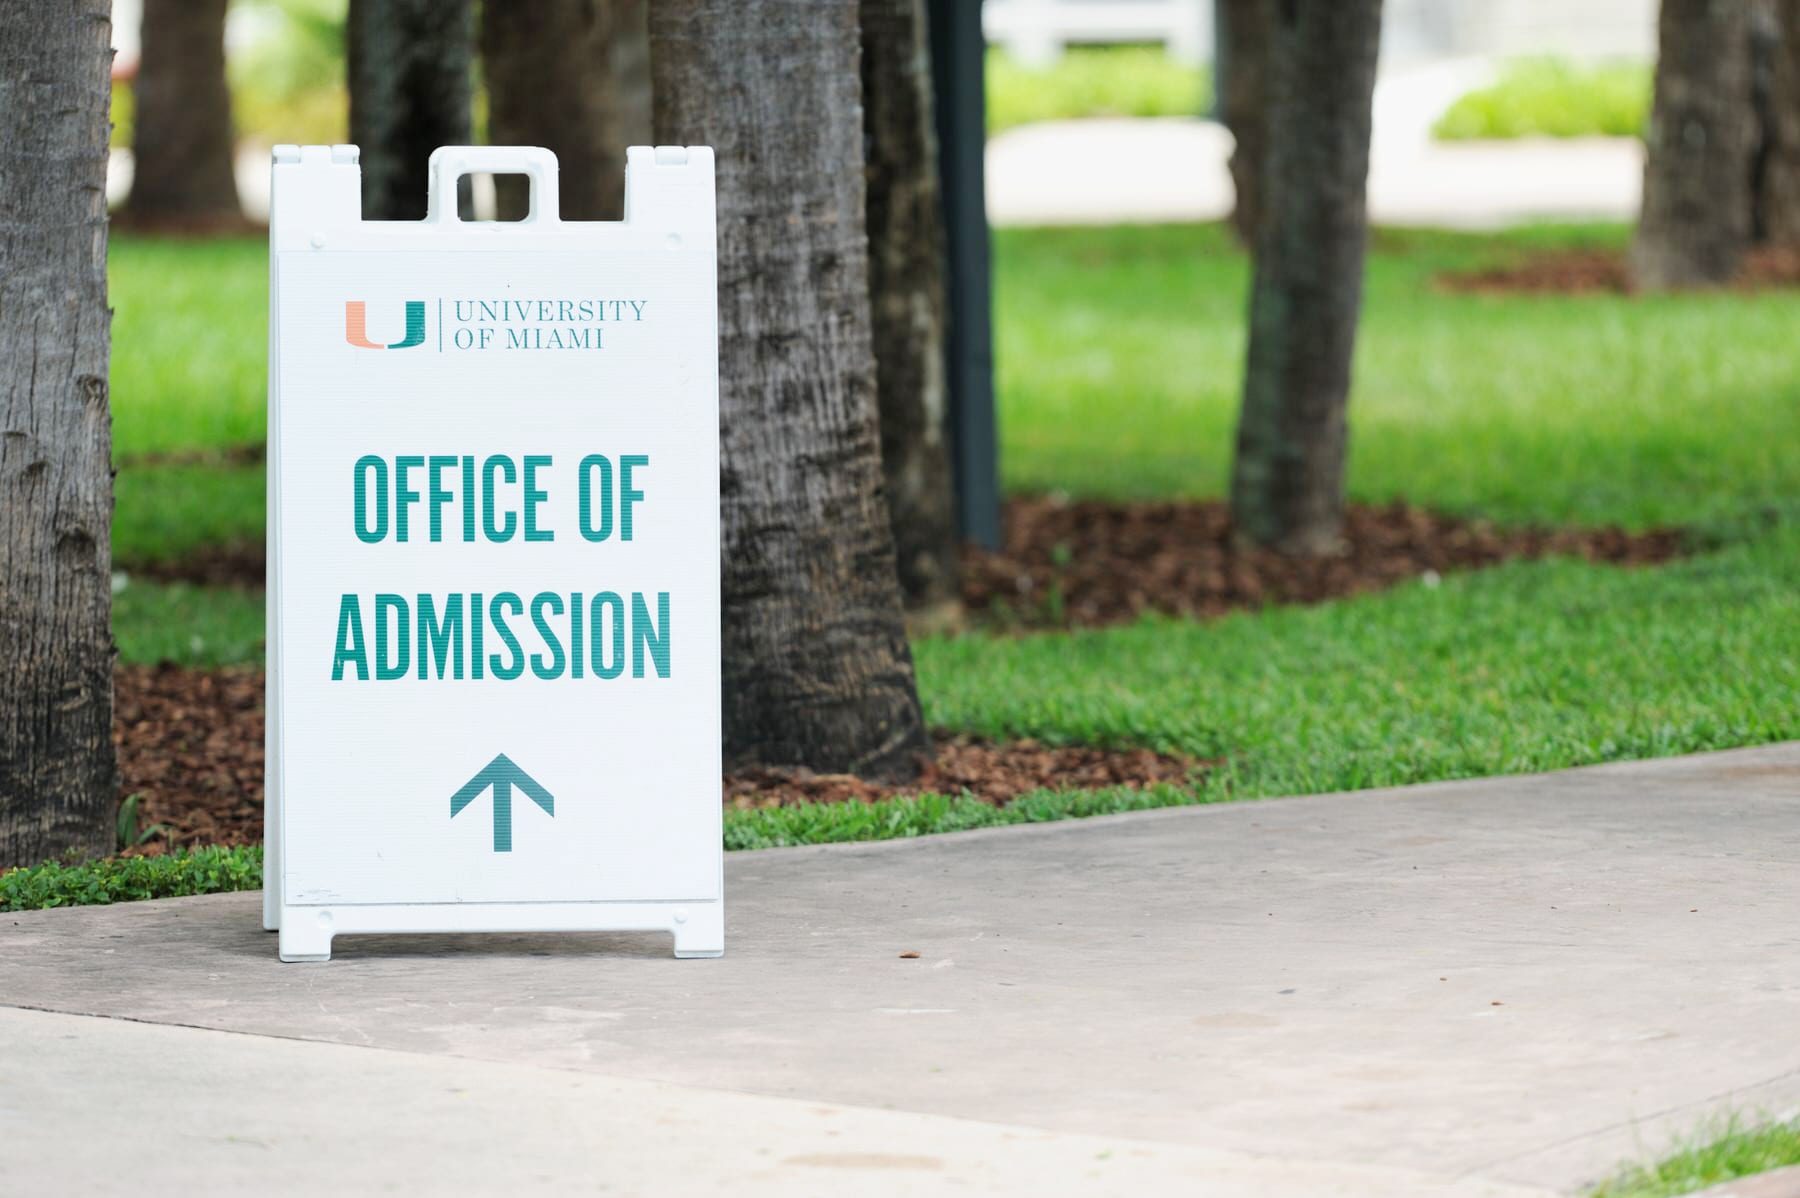 A sidewalk sign for the University of Miami Office of Admissions.